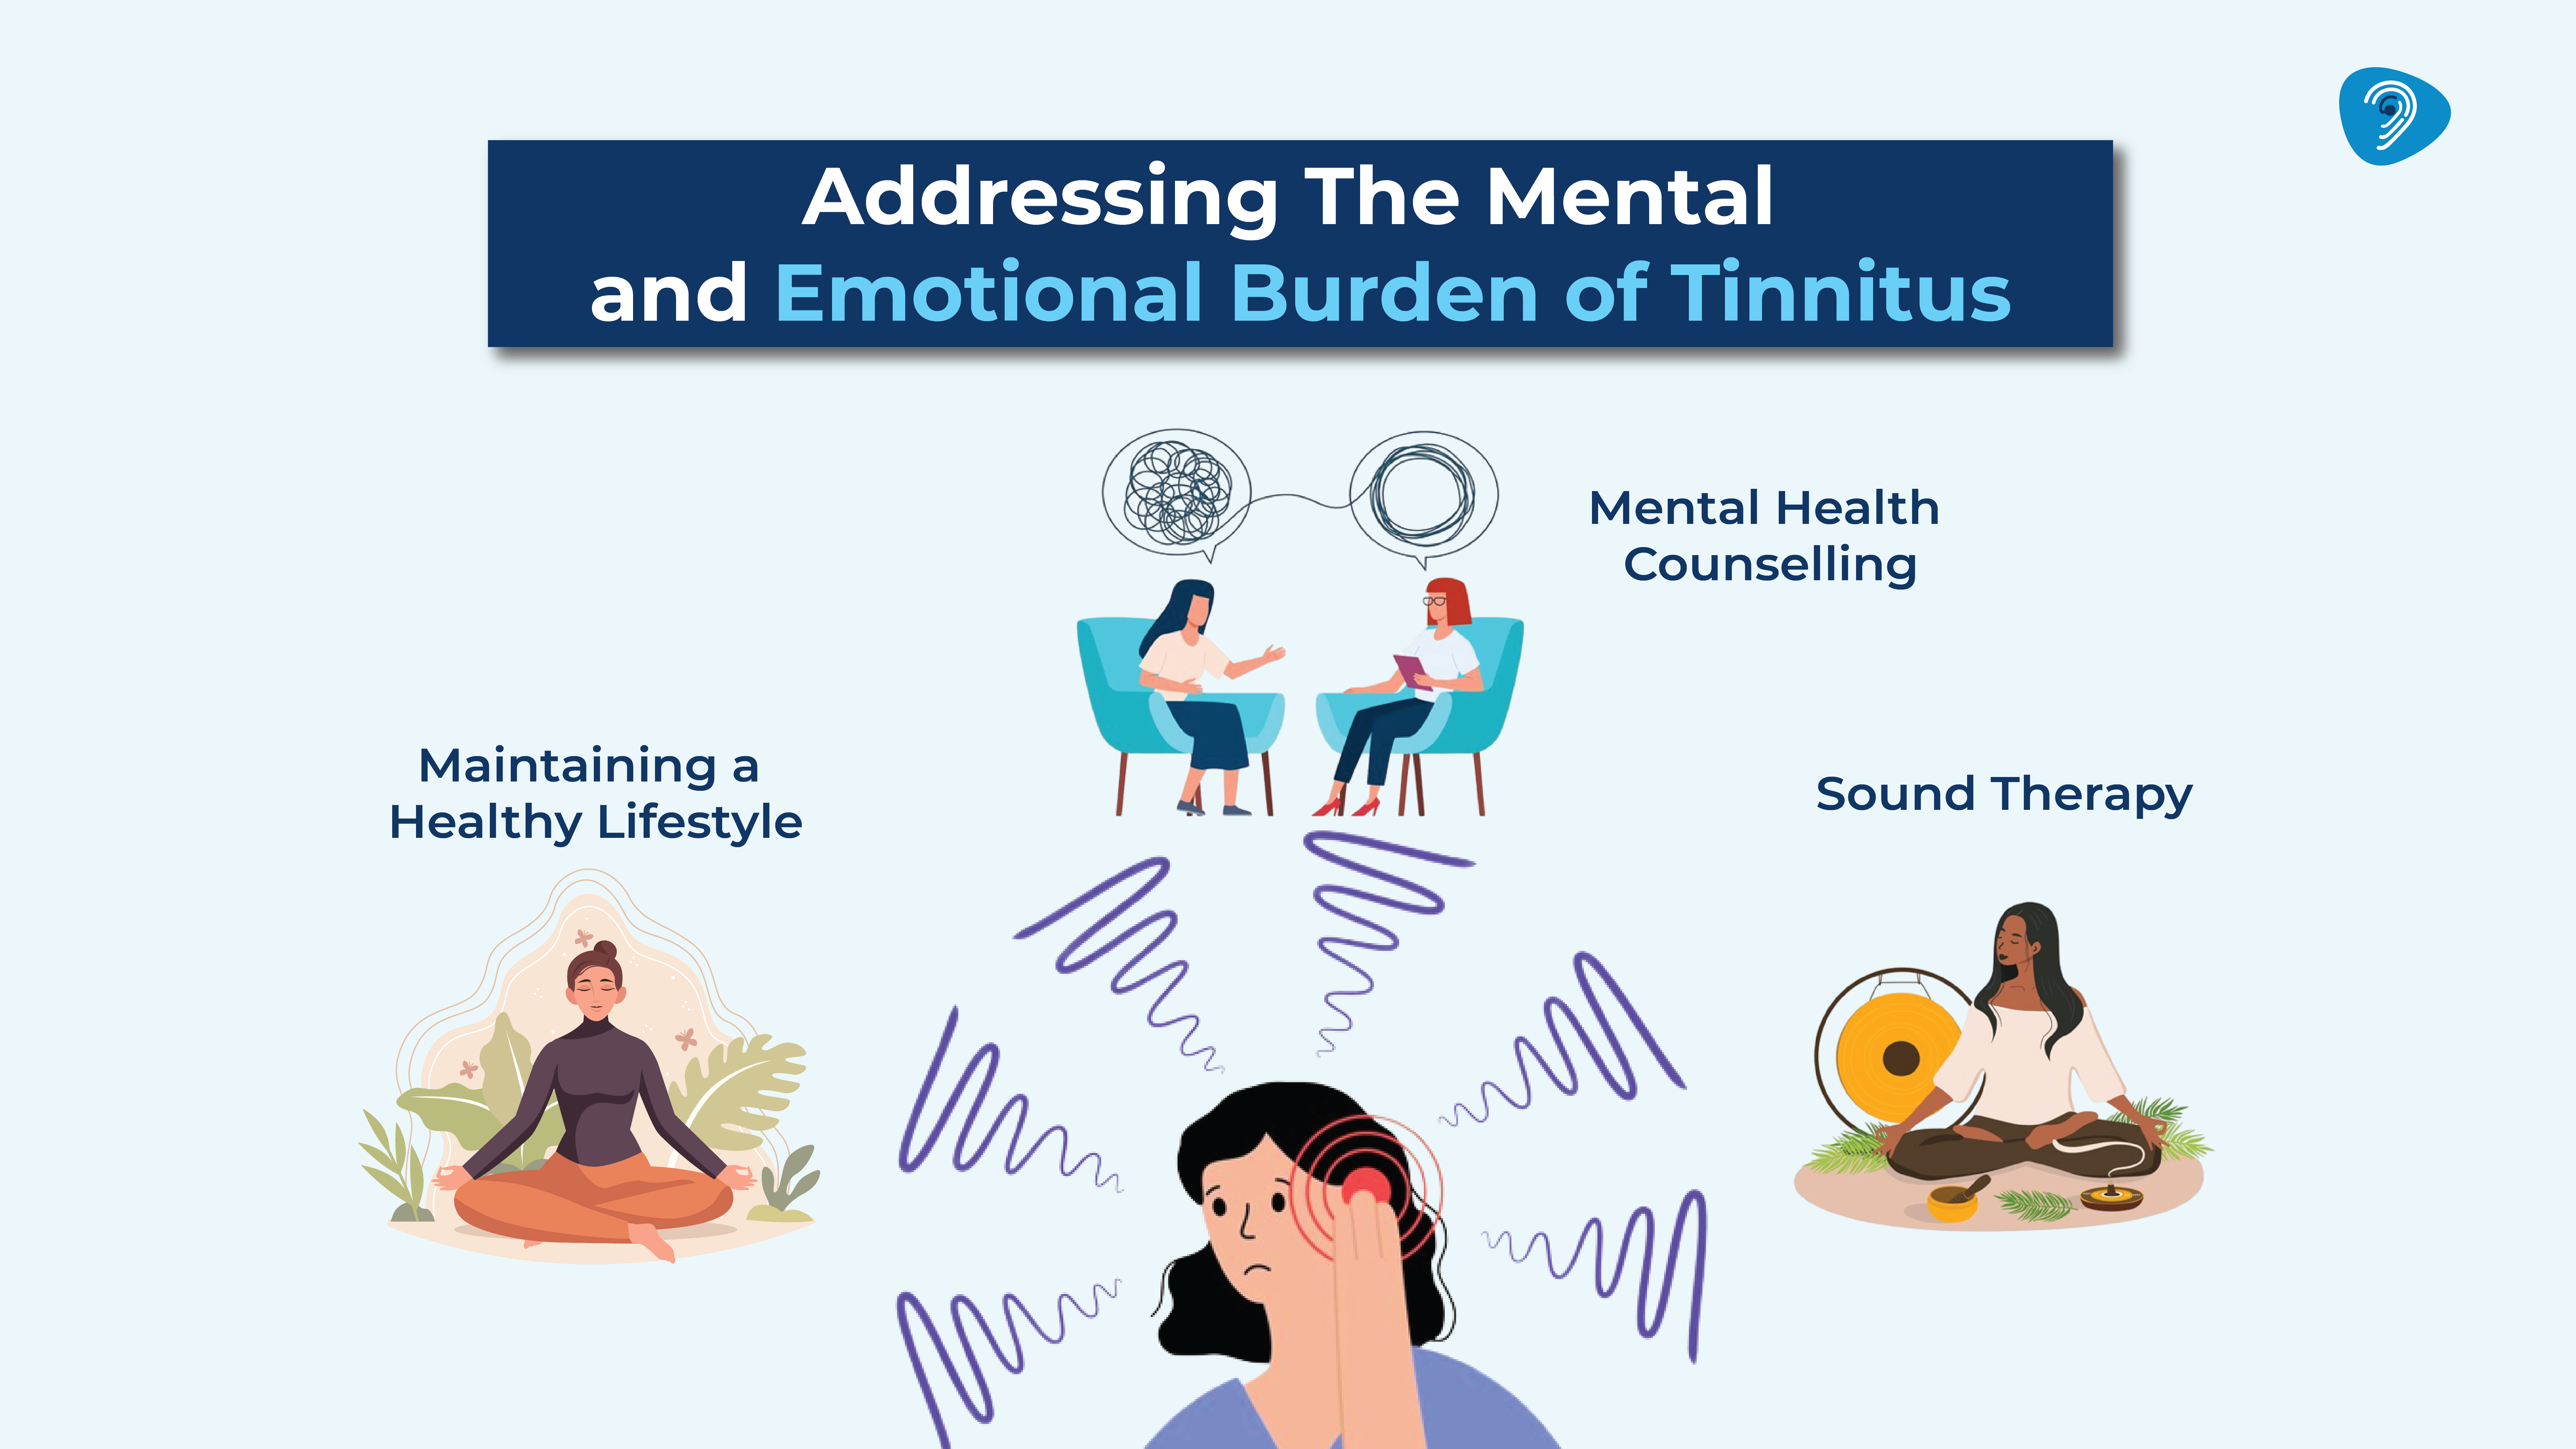 Addressing The Mental and Emotional Burden of Tinnitus